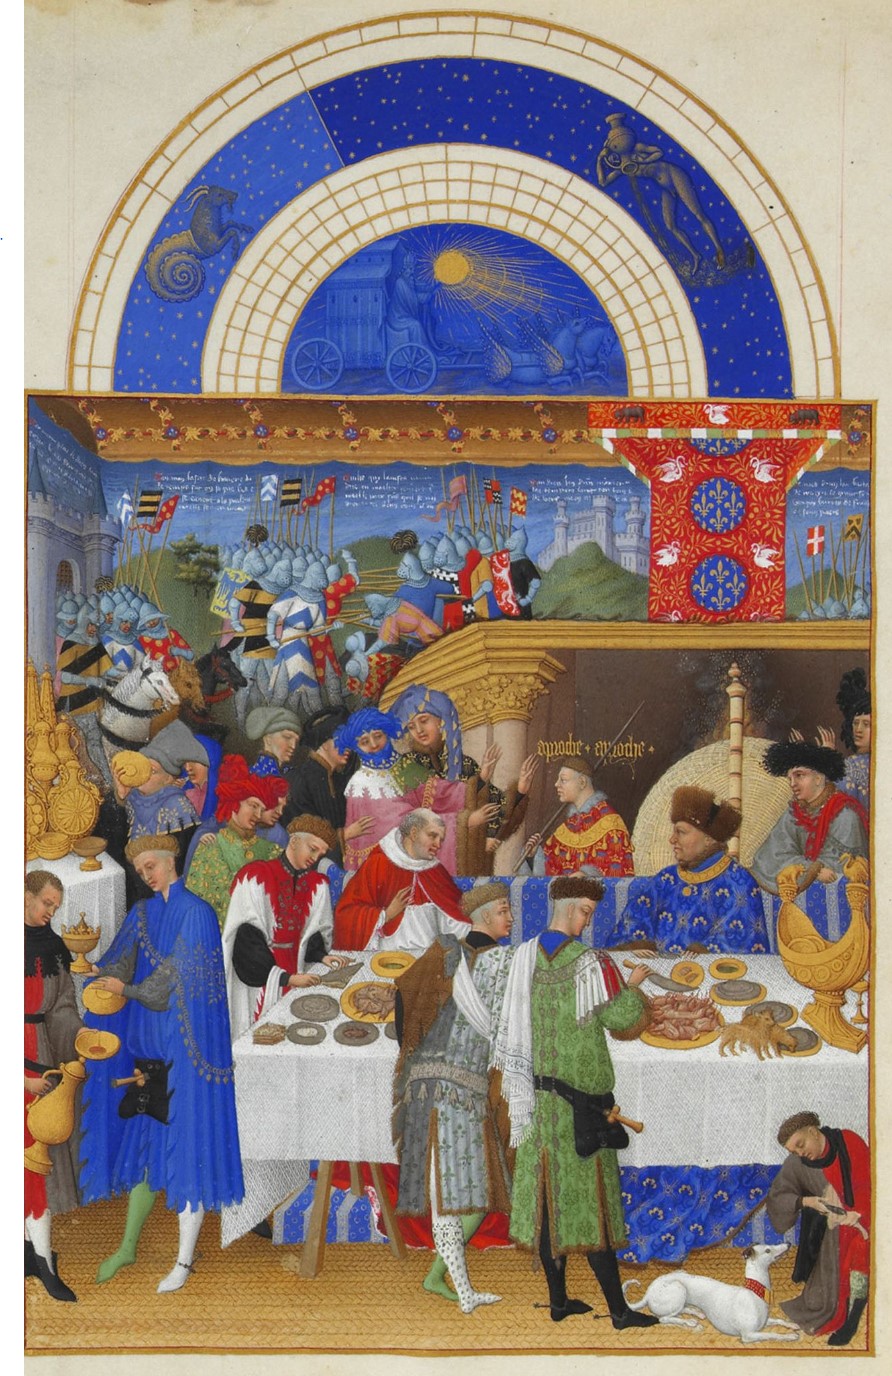 <p><strong><em>The Limbourg Brothers, __________________ : January, 1413-1416, ink an dcolors on vellum, Musee Conde, Chantilly France</em></strong></p><p></p>